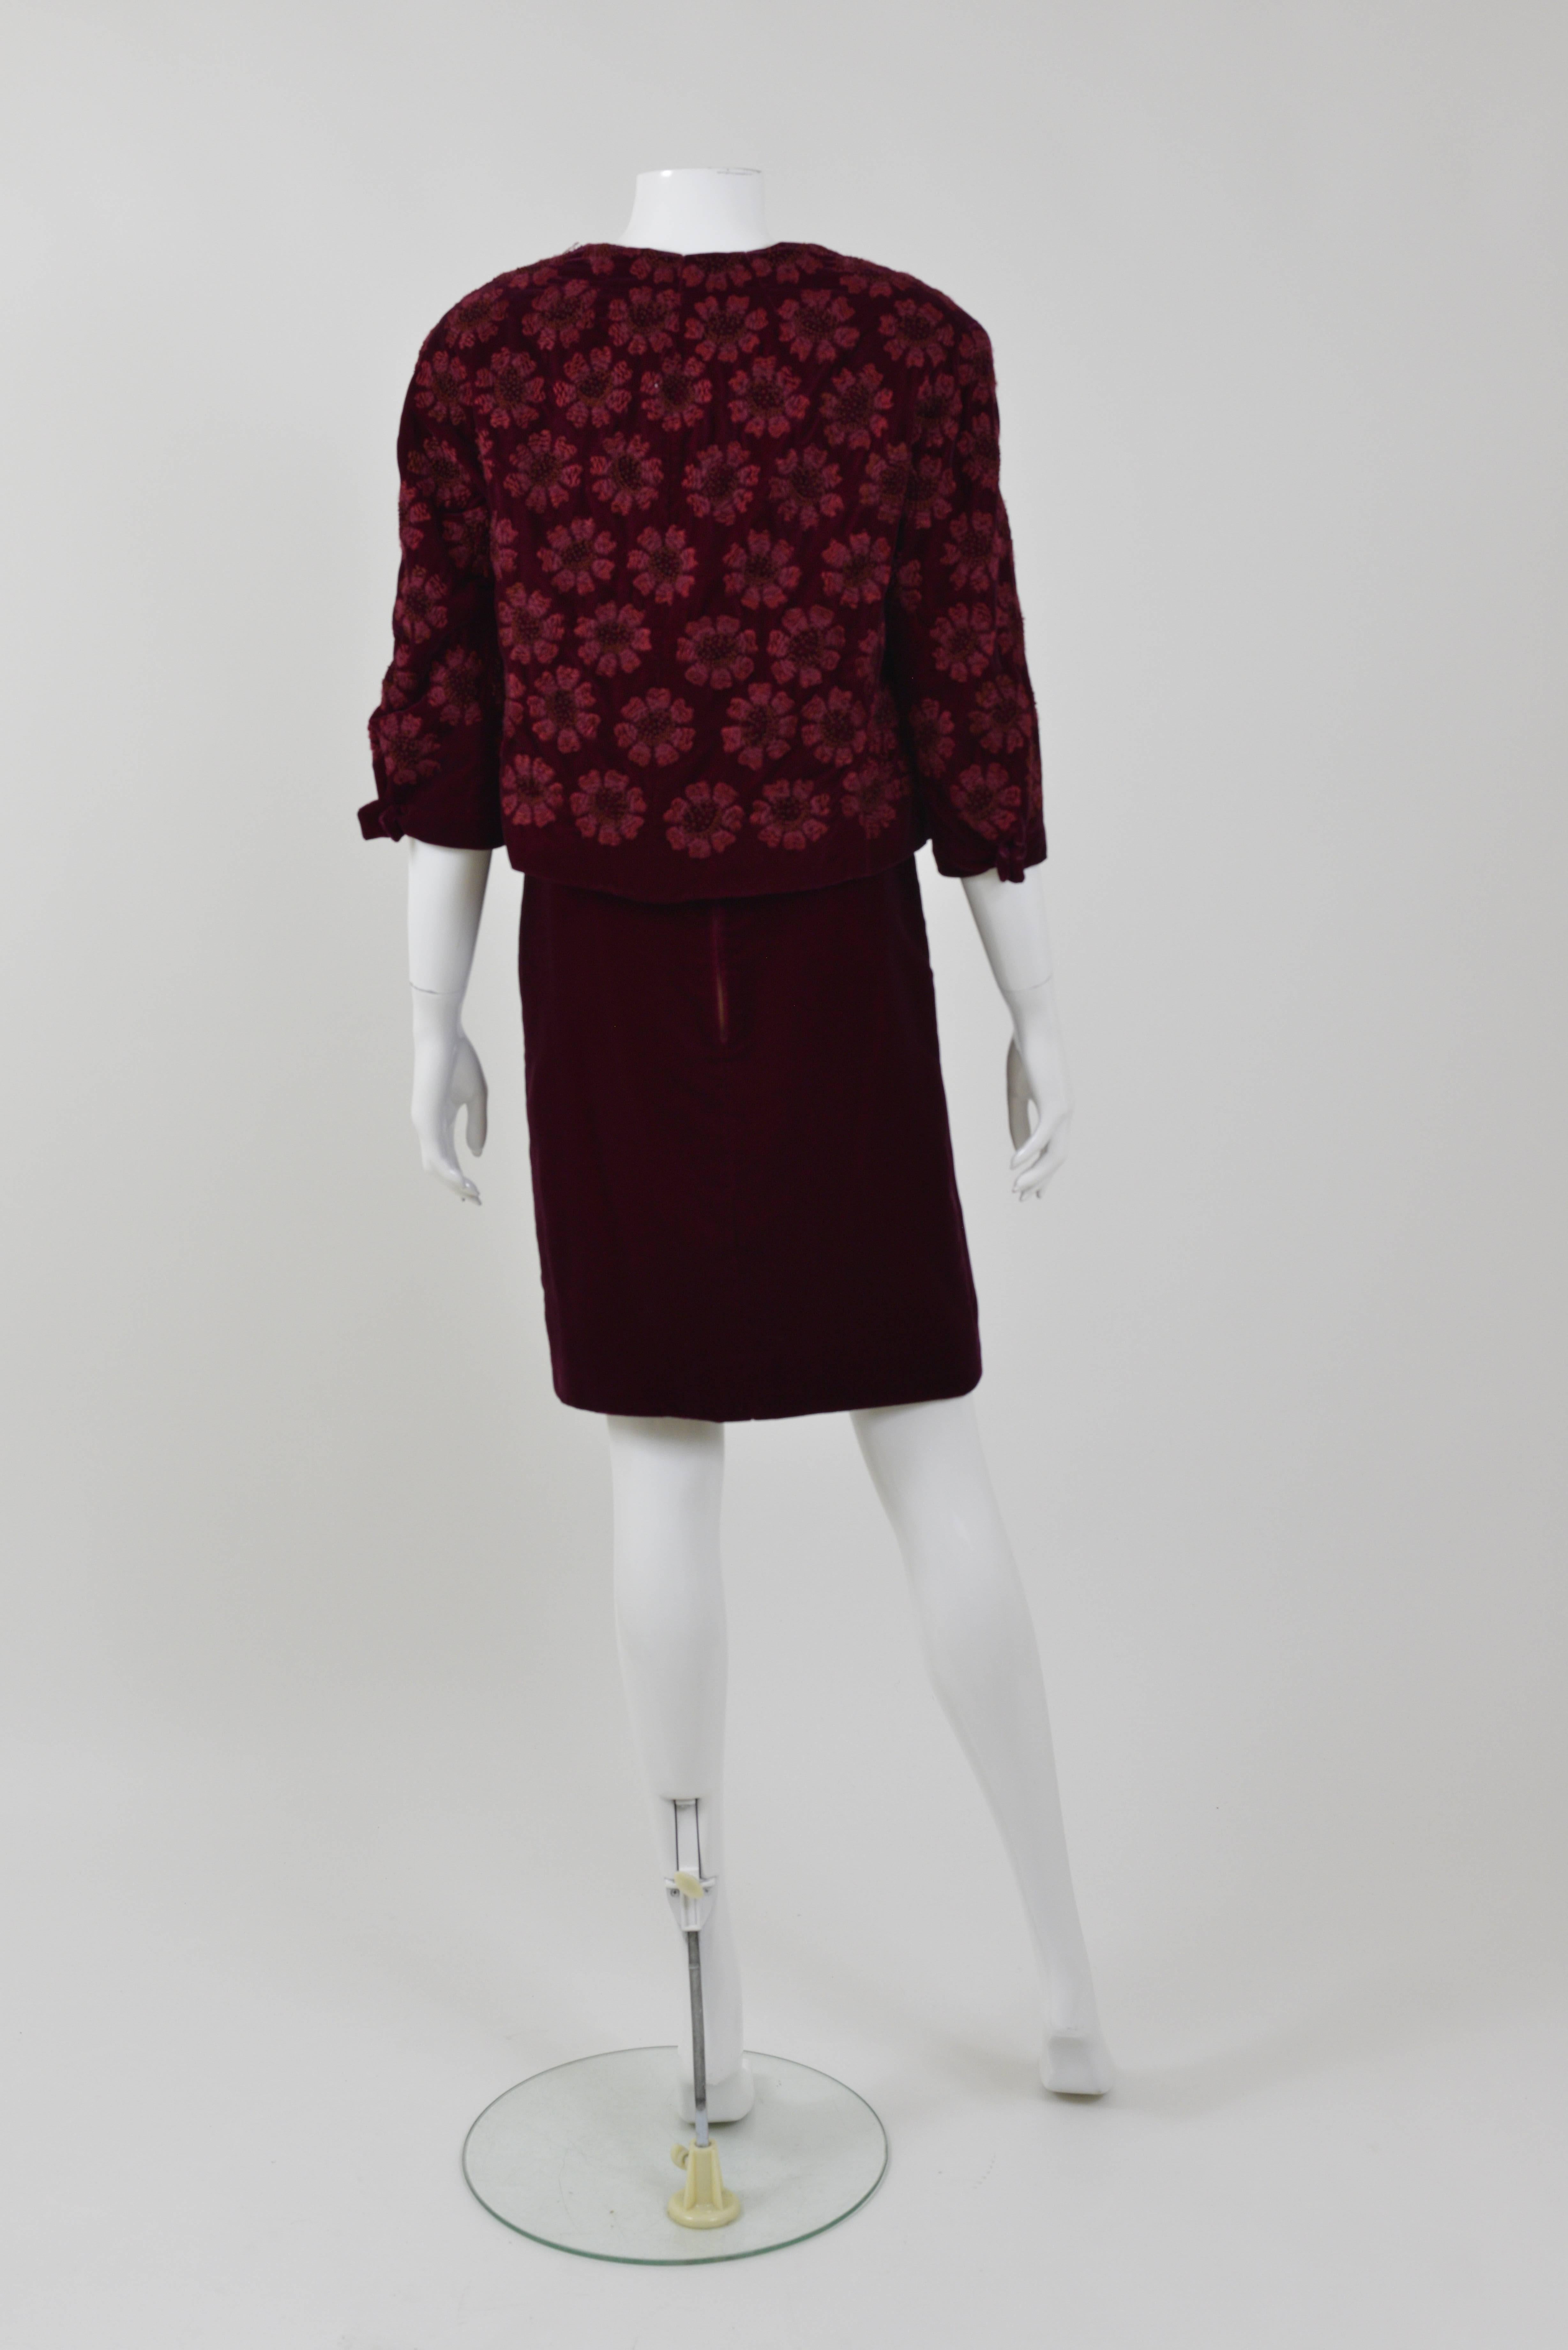 This lovely 1960s CURIEL Italian couture cocktail dress is in burgundy velvet and satin silk fabric. 
The dress has back zip closure and is fully lined.
The bolero jacket has floral embroidery and is fully lined.
It is included a chiffon scarf .
